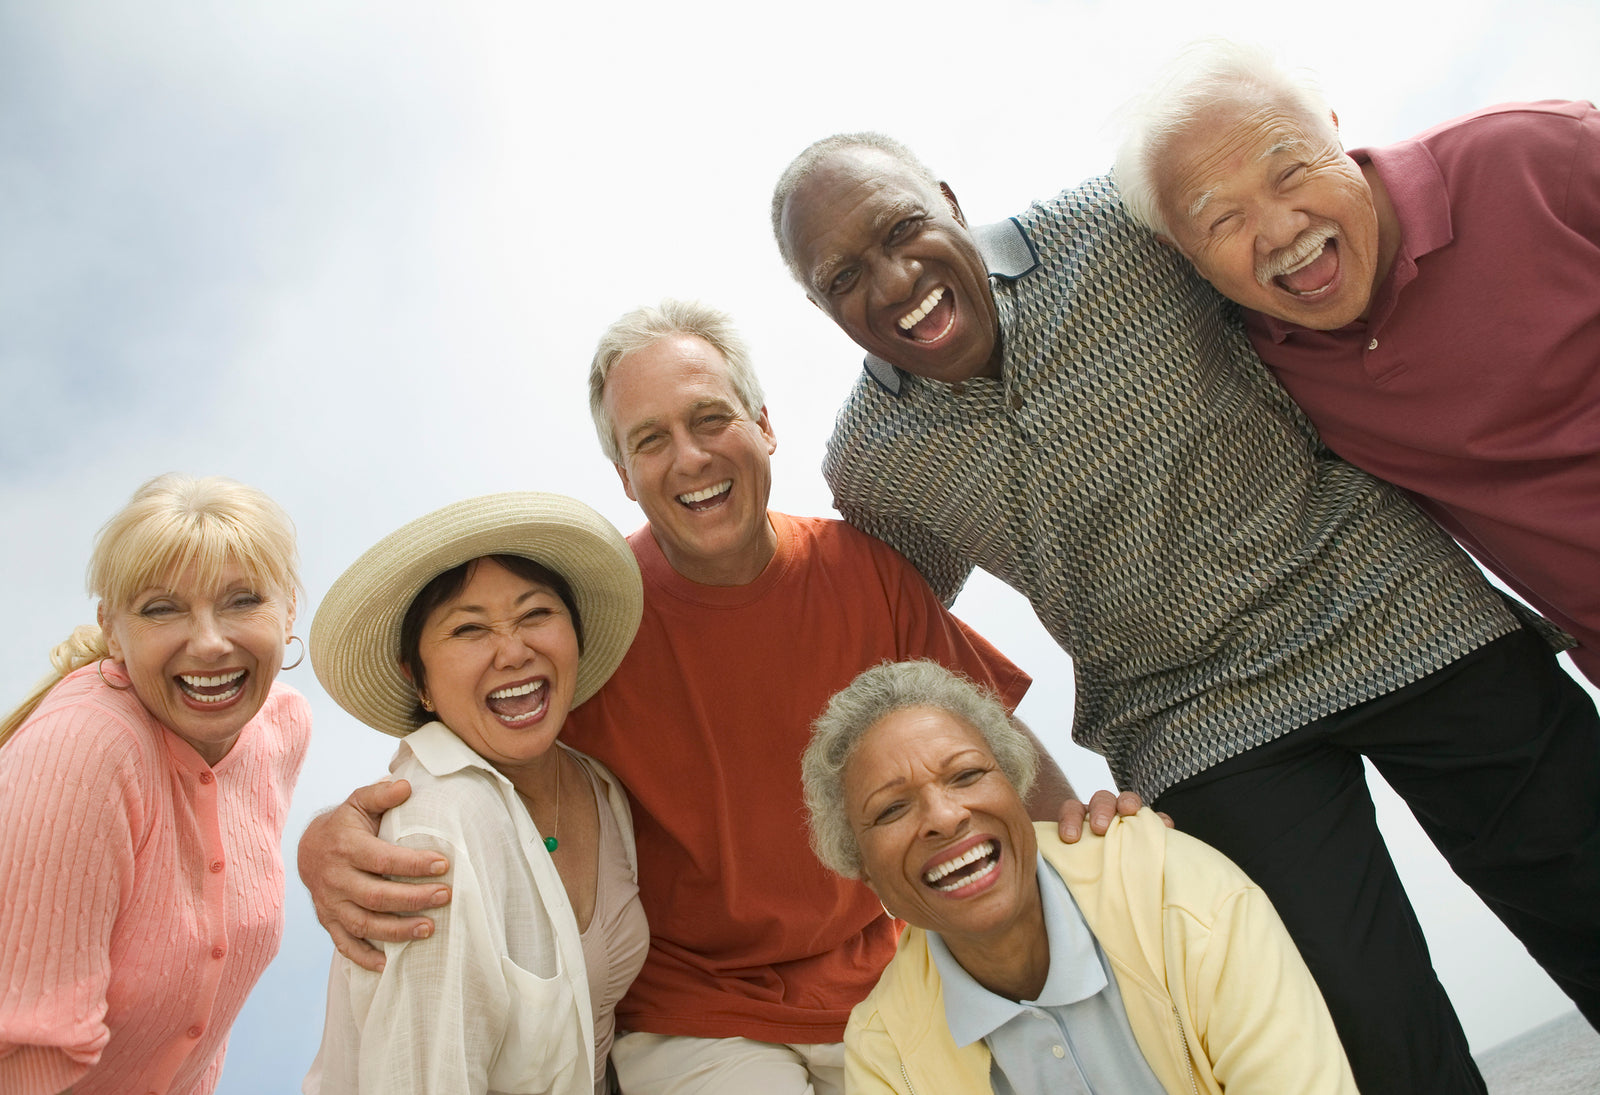 The Healing Power of Laughter: How Humor Boosts Well-being in Senior Citizens